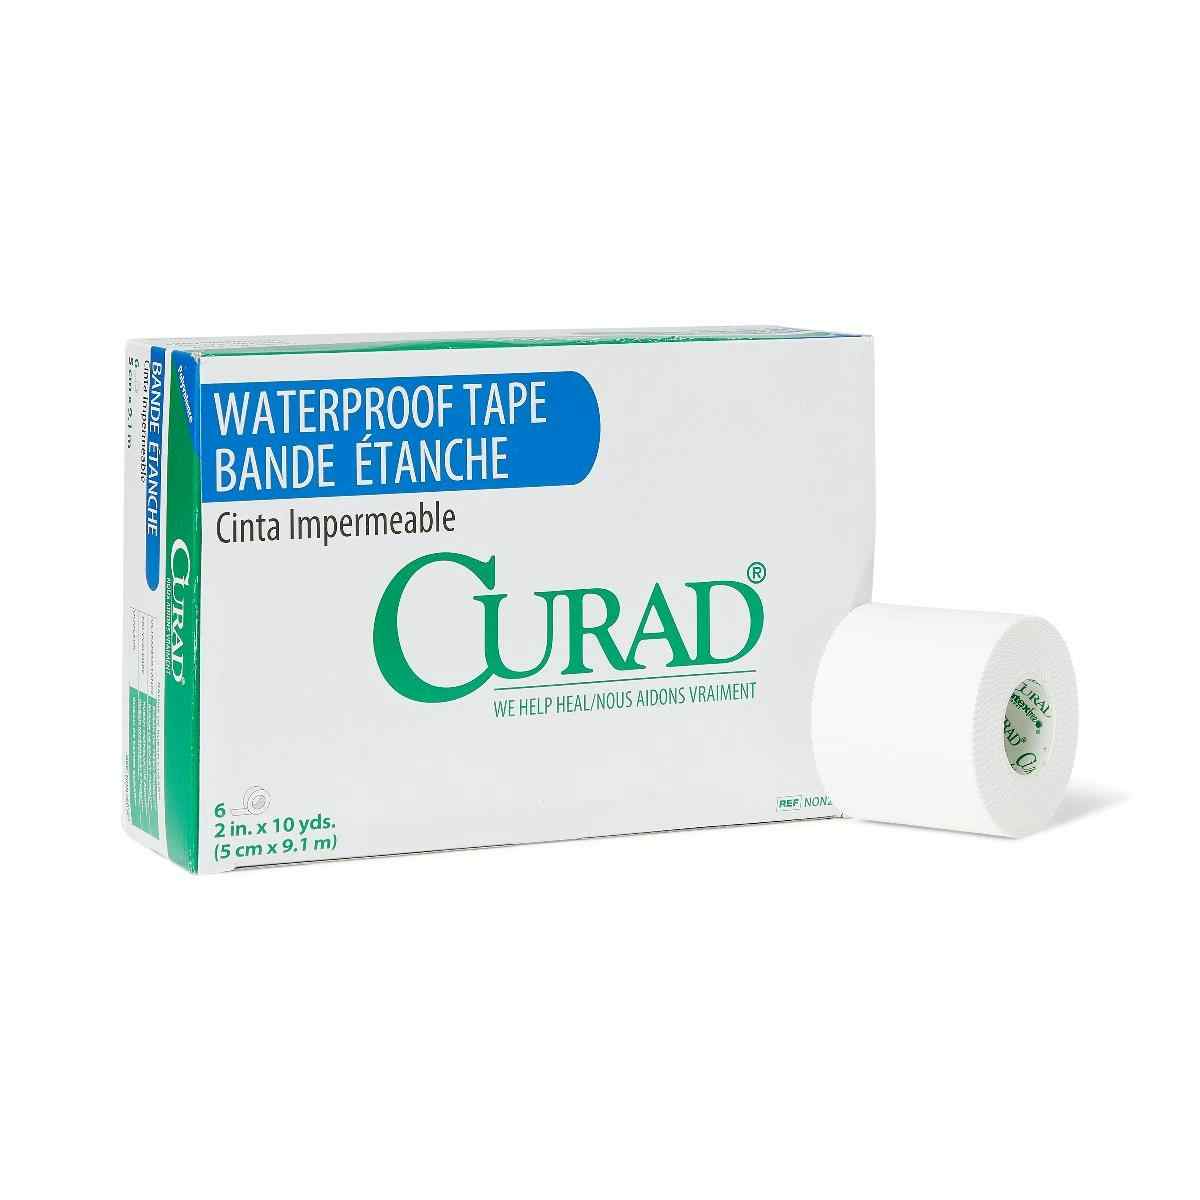 CURAD Waterproof Adhesive Tape, NON260502Z, 2" X 10 yd - Box of 6